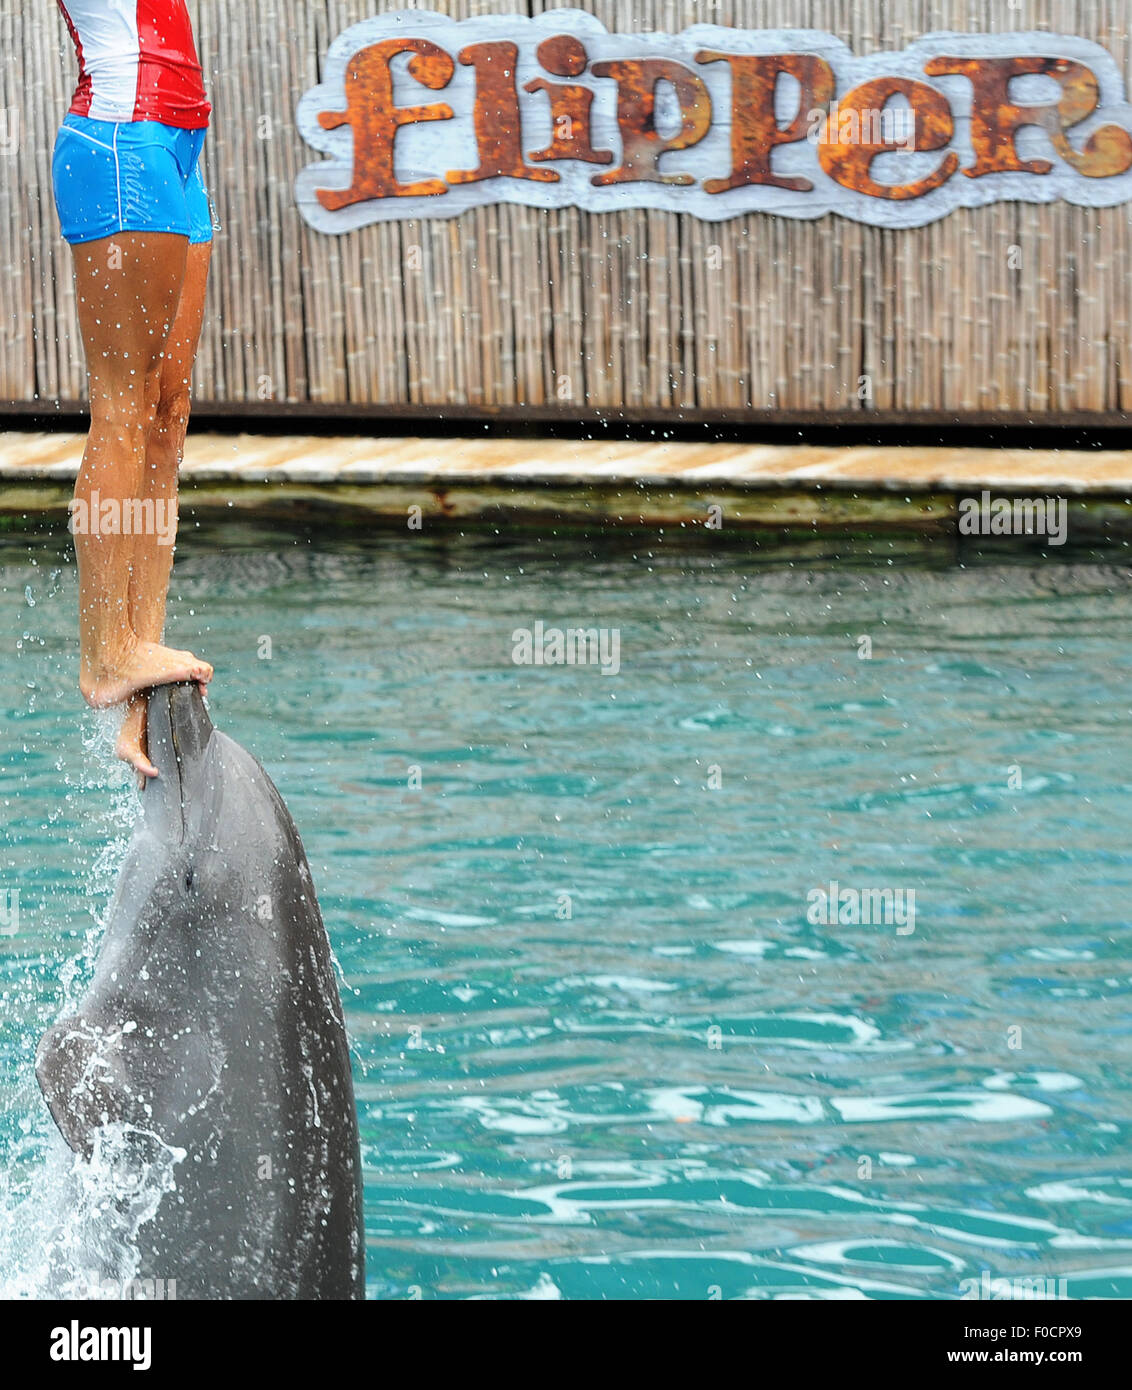 March 26, 2015 - Key Biscayne, Florida, United States - A trainer performs with a dolphin at Miami Seaquarium. Stock Photo